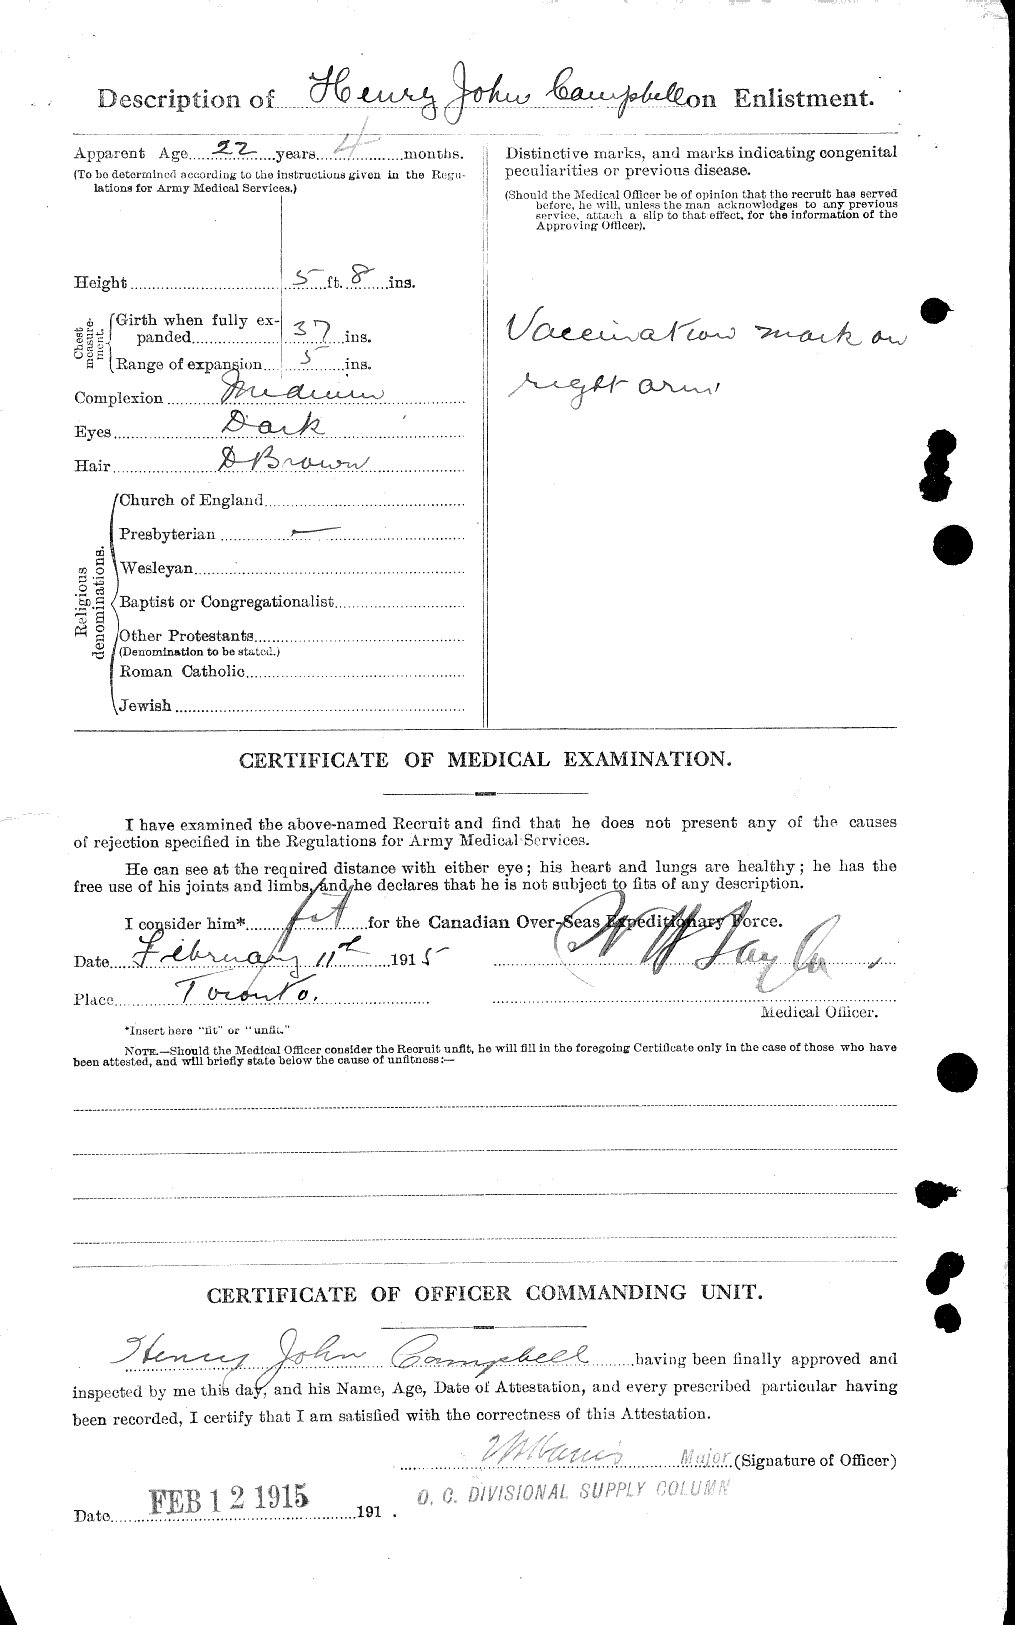 Personnel Records of the First World War - CEF 008415b